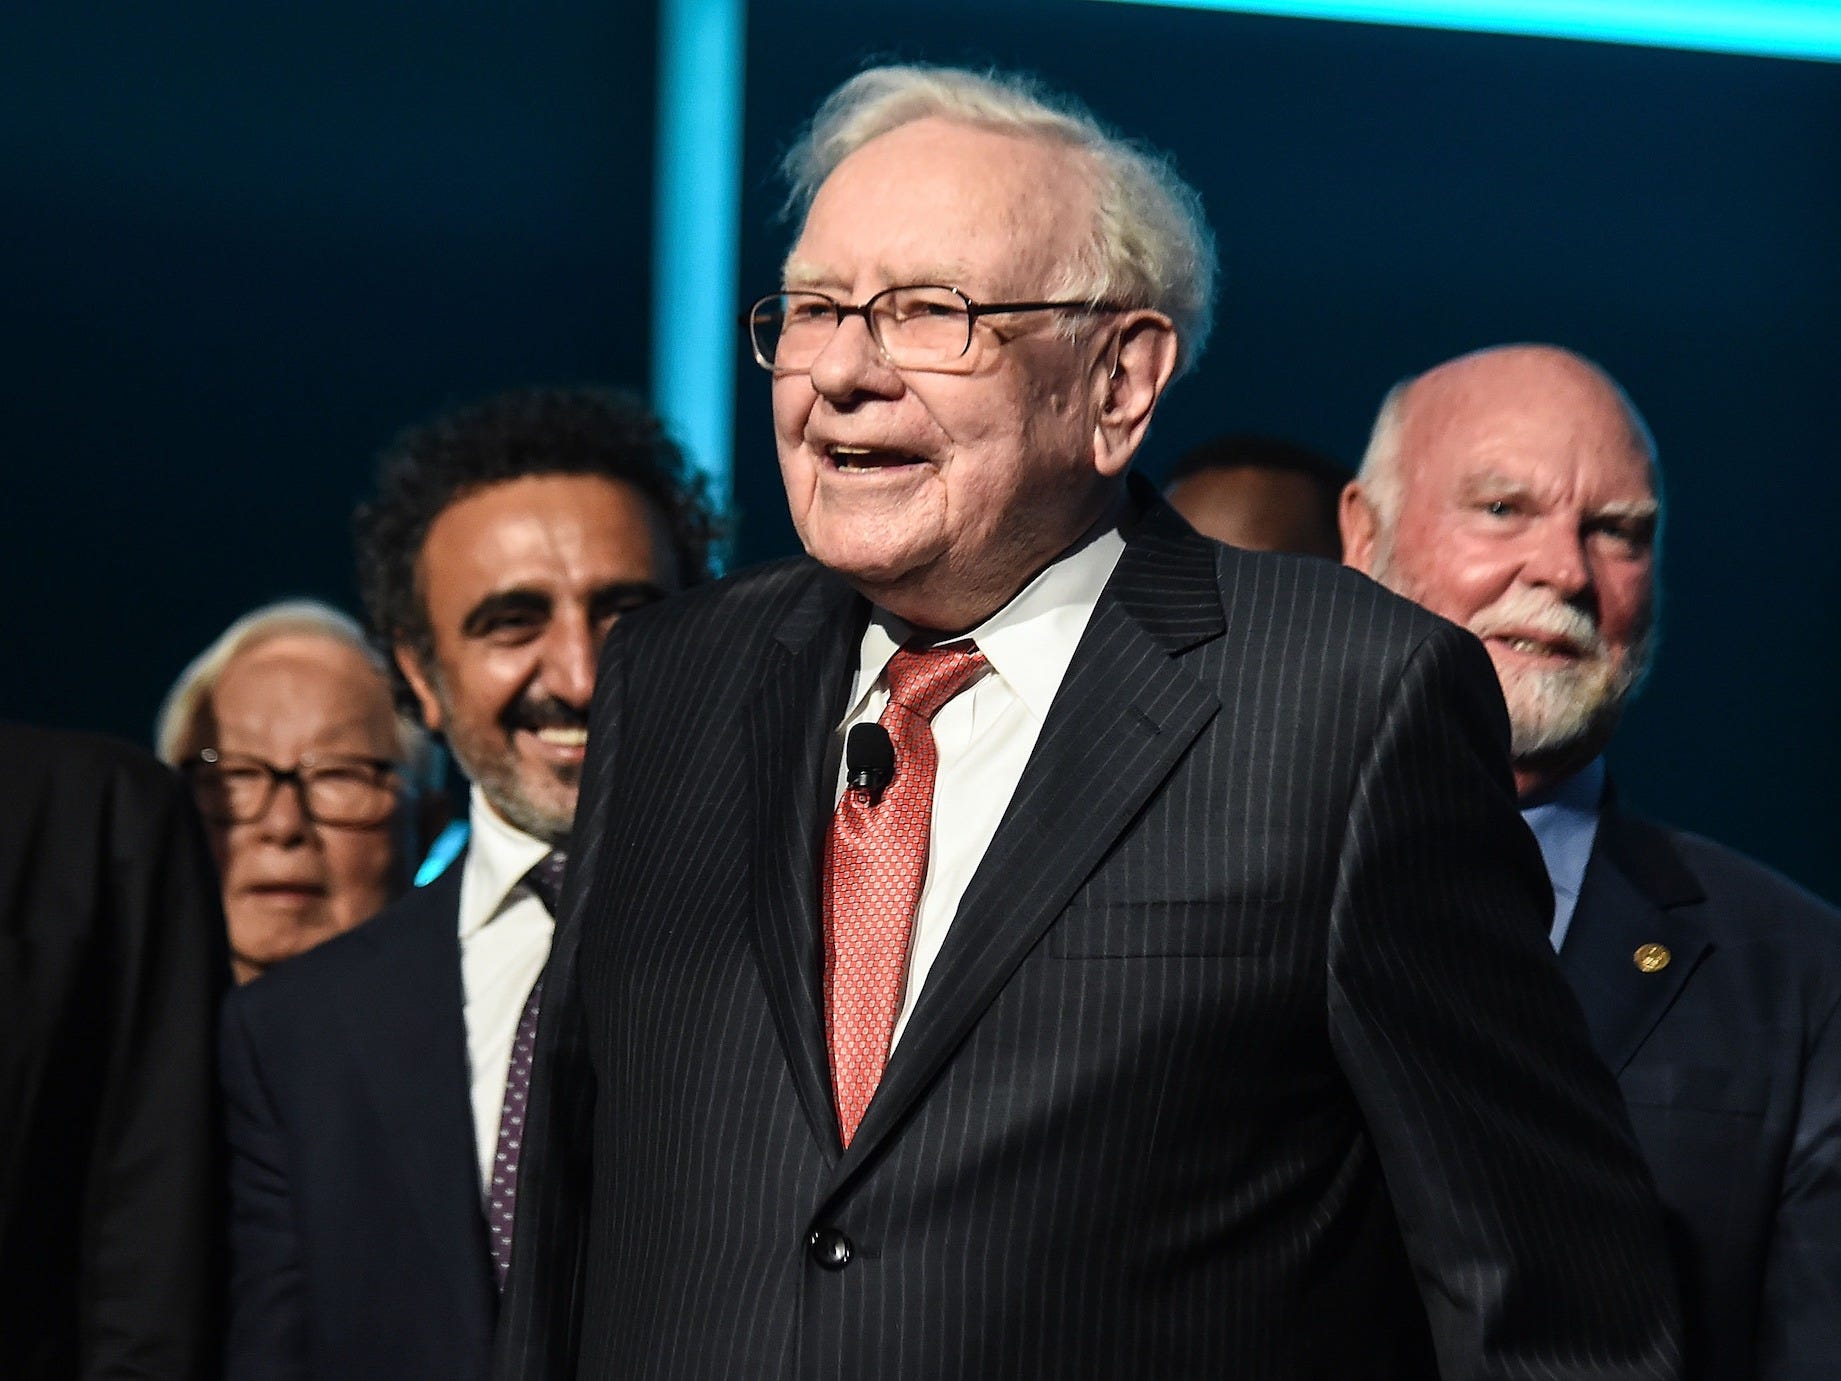 <p>The vast <a href="https://www.businessinsider.com/facts-about-warren-buffett-2016-12#he-bought-his-first-stock-at-age-11-2">majority of Buffett's wealth</a> was earned after his 50th birthday. His <a href="https://markets.businessinsider.com/news/stocks/warren-buffett-salary-compensation-berkshire-hathaway-stock-billionaires-wealth-munger-2023-3">salary at Berkshire Hathaway</a> last year was just $100,000, the same as it's been the last 40 years, and he reimbursed the company $50,000 in part to cover his personal calls and postage. The company spent triple Buffett's yearly salary — $301, 589 — on his personal and home security last year, according ot the company's <a href="https://www.sec.gov/Archives/edgar/data/1067983/000119312523073948/0001193125-23-073948-index.htm" rel="noopener">proxy statement</a>.</p>